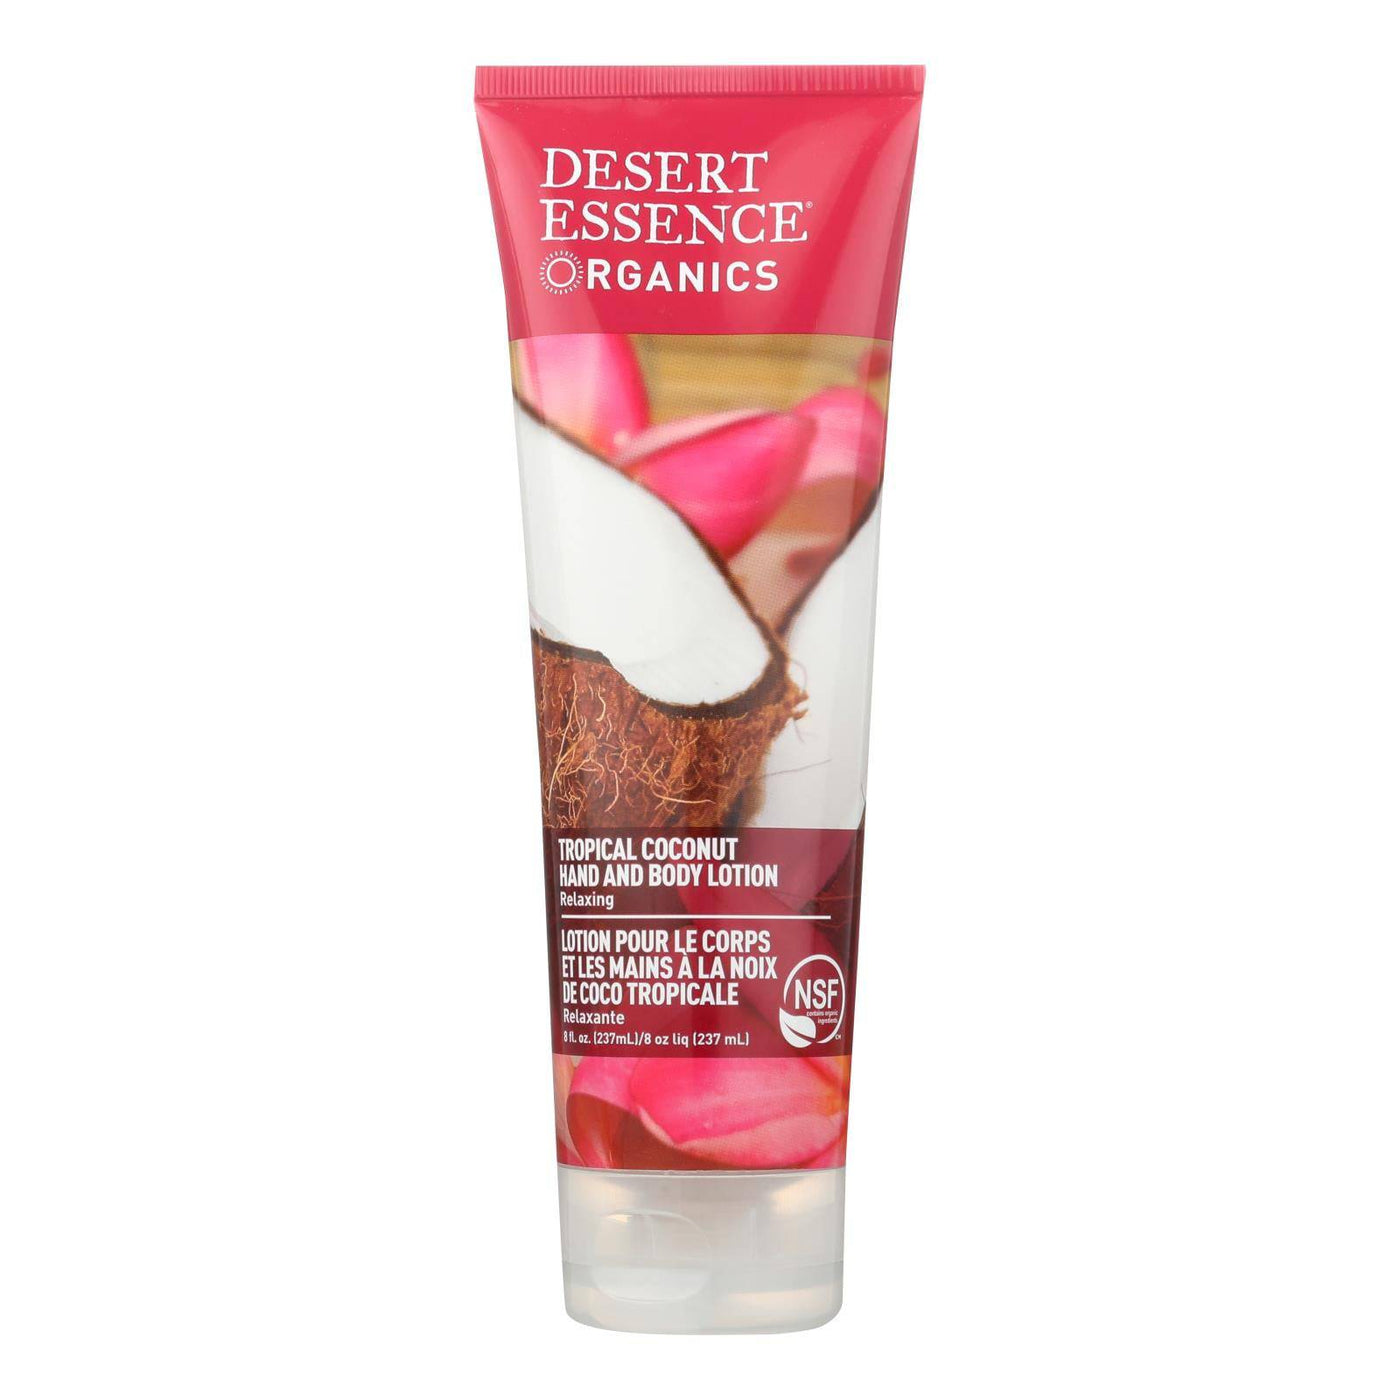 Buy Desert Essence - Hand And Body Lotion Tropical Coconut - 8 Fl Oz  at OnlyNaturals.us